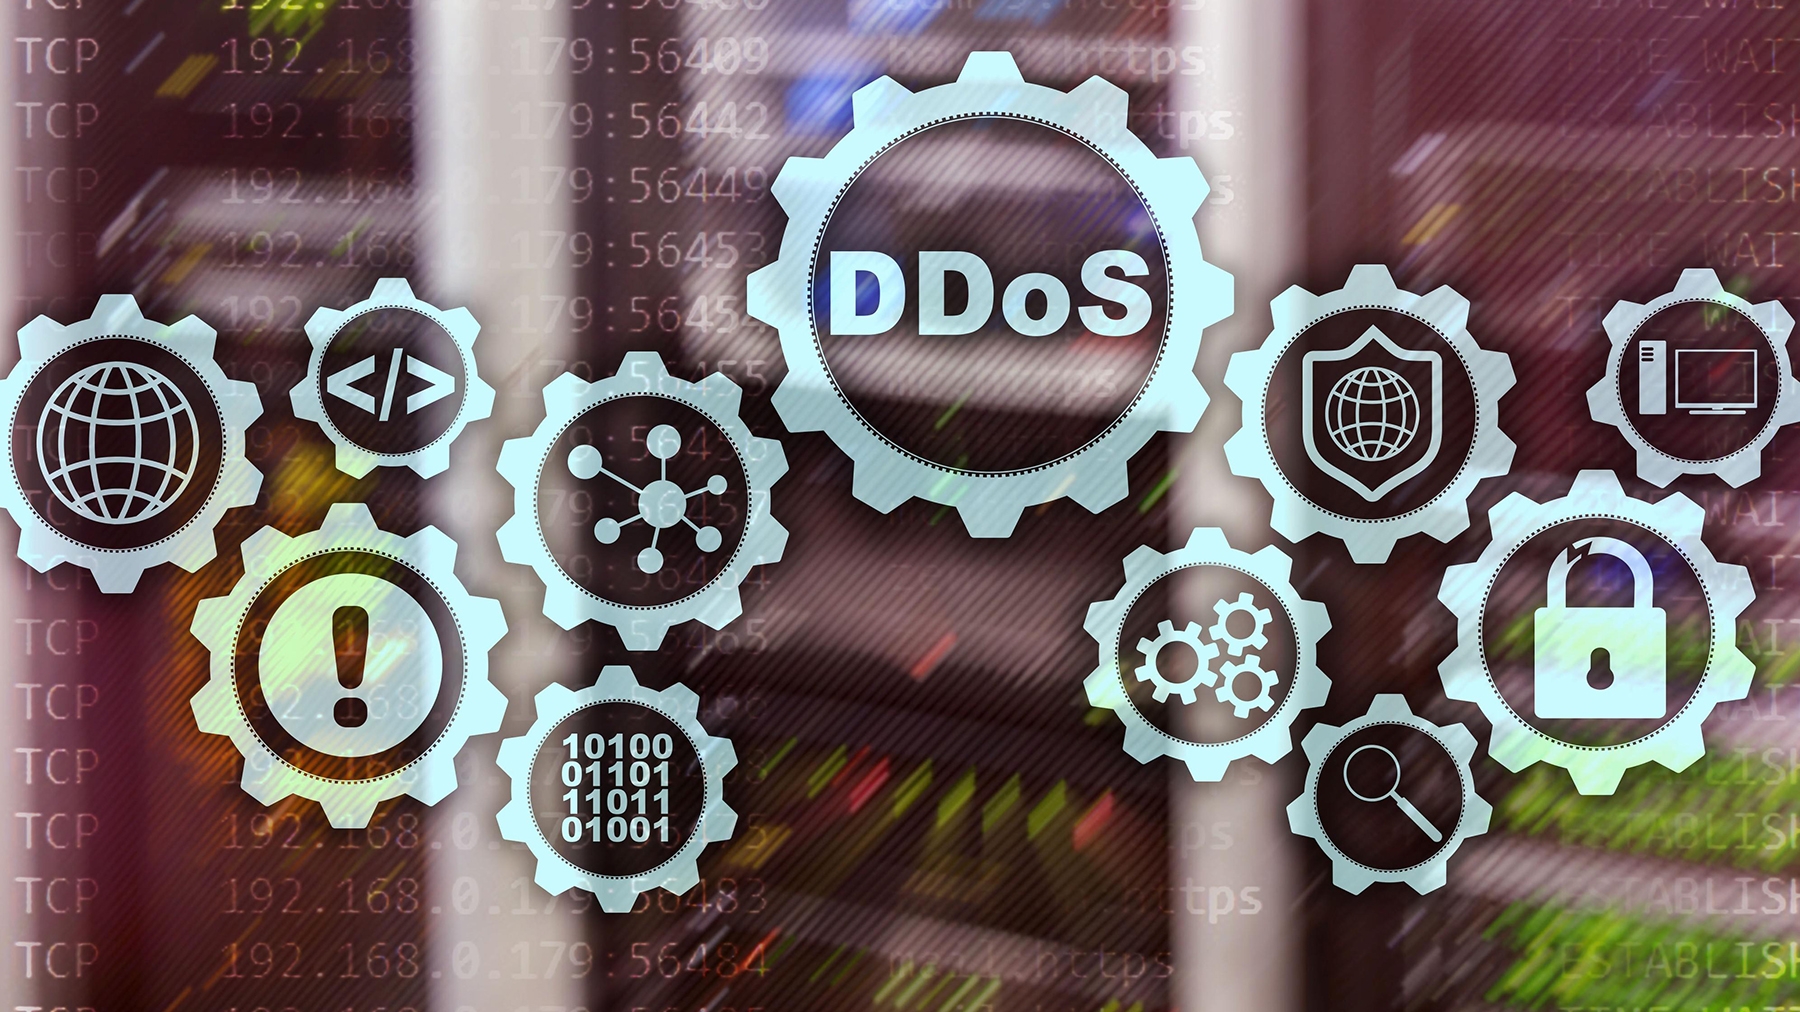 Proper DDoS Protection Requires Both Detective and Preventive Controls